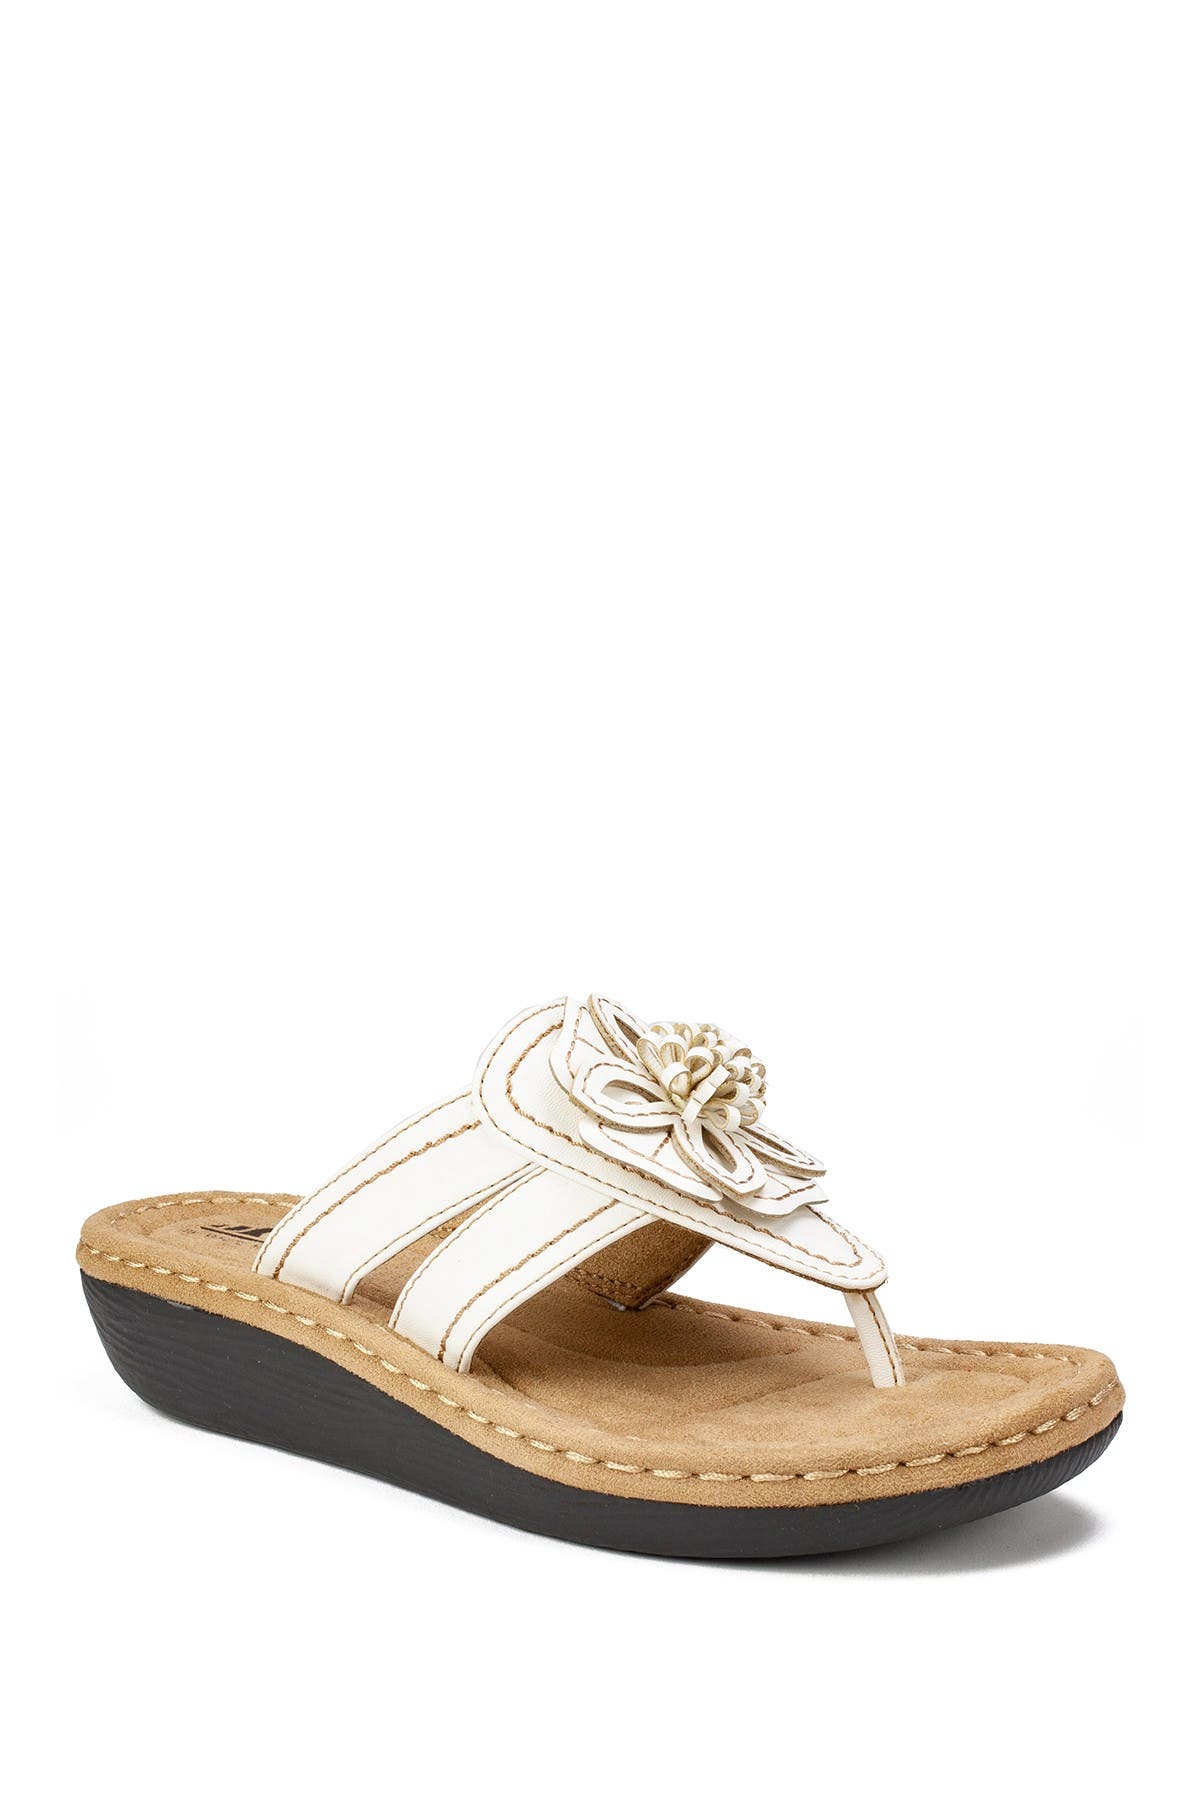 CLIFFS BY WHITE MOUNTAIN Low heels CARNATION THONG COMFORT SANDAL